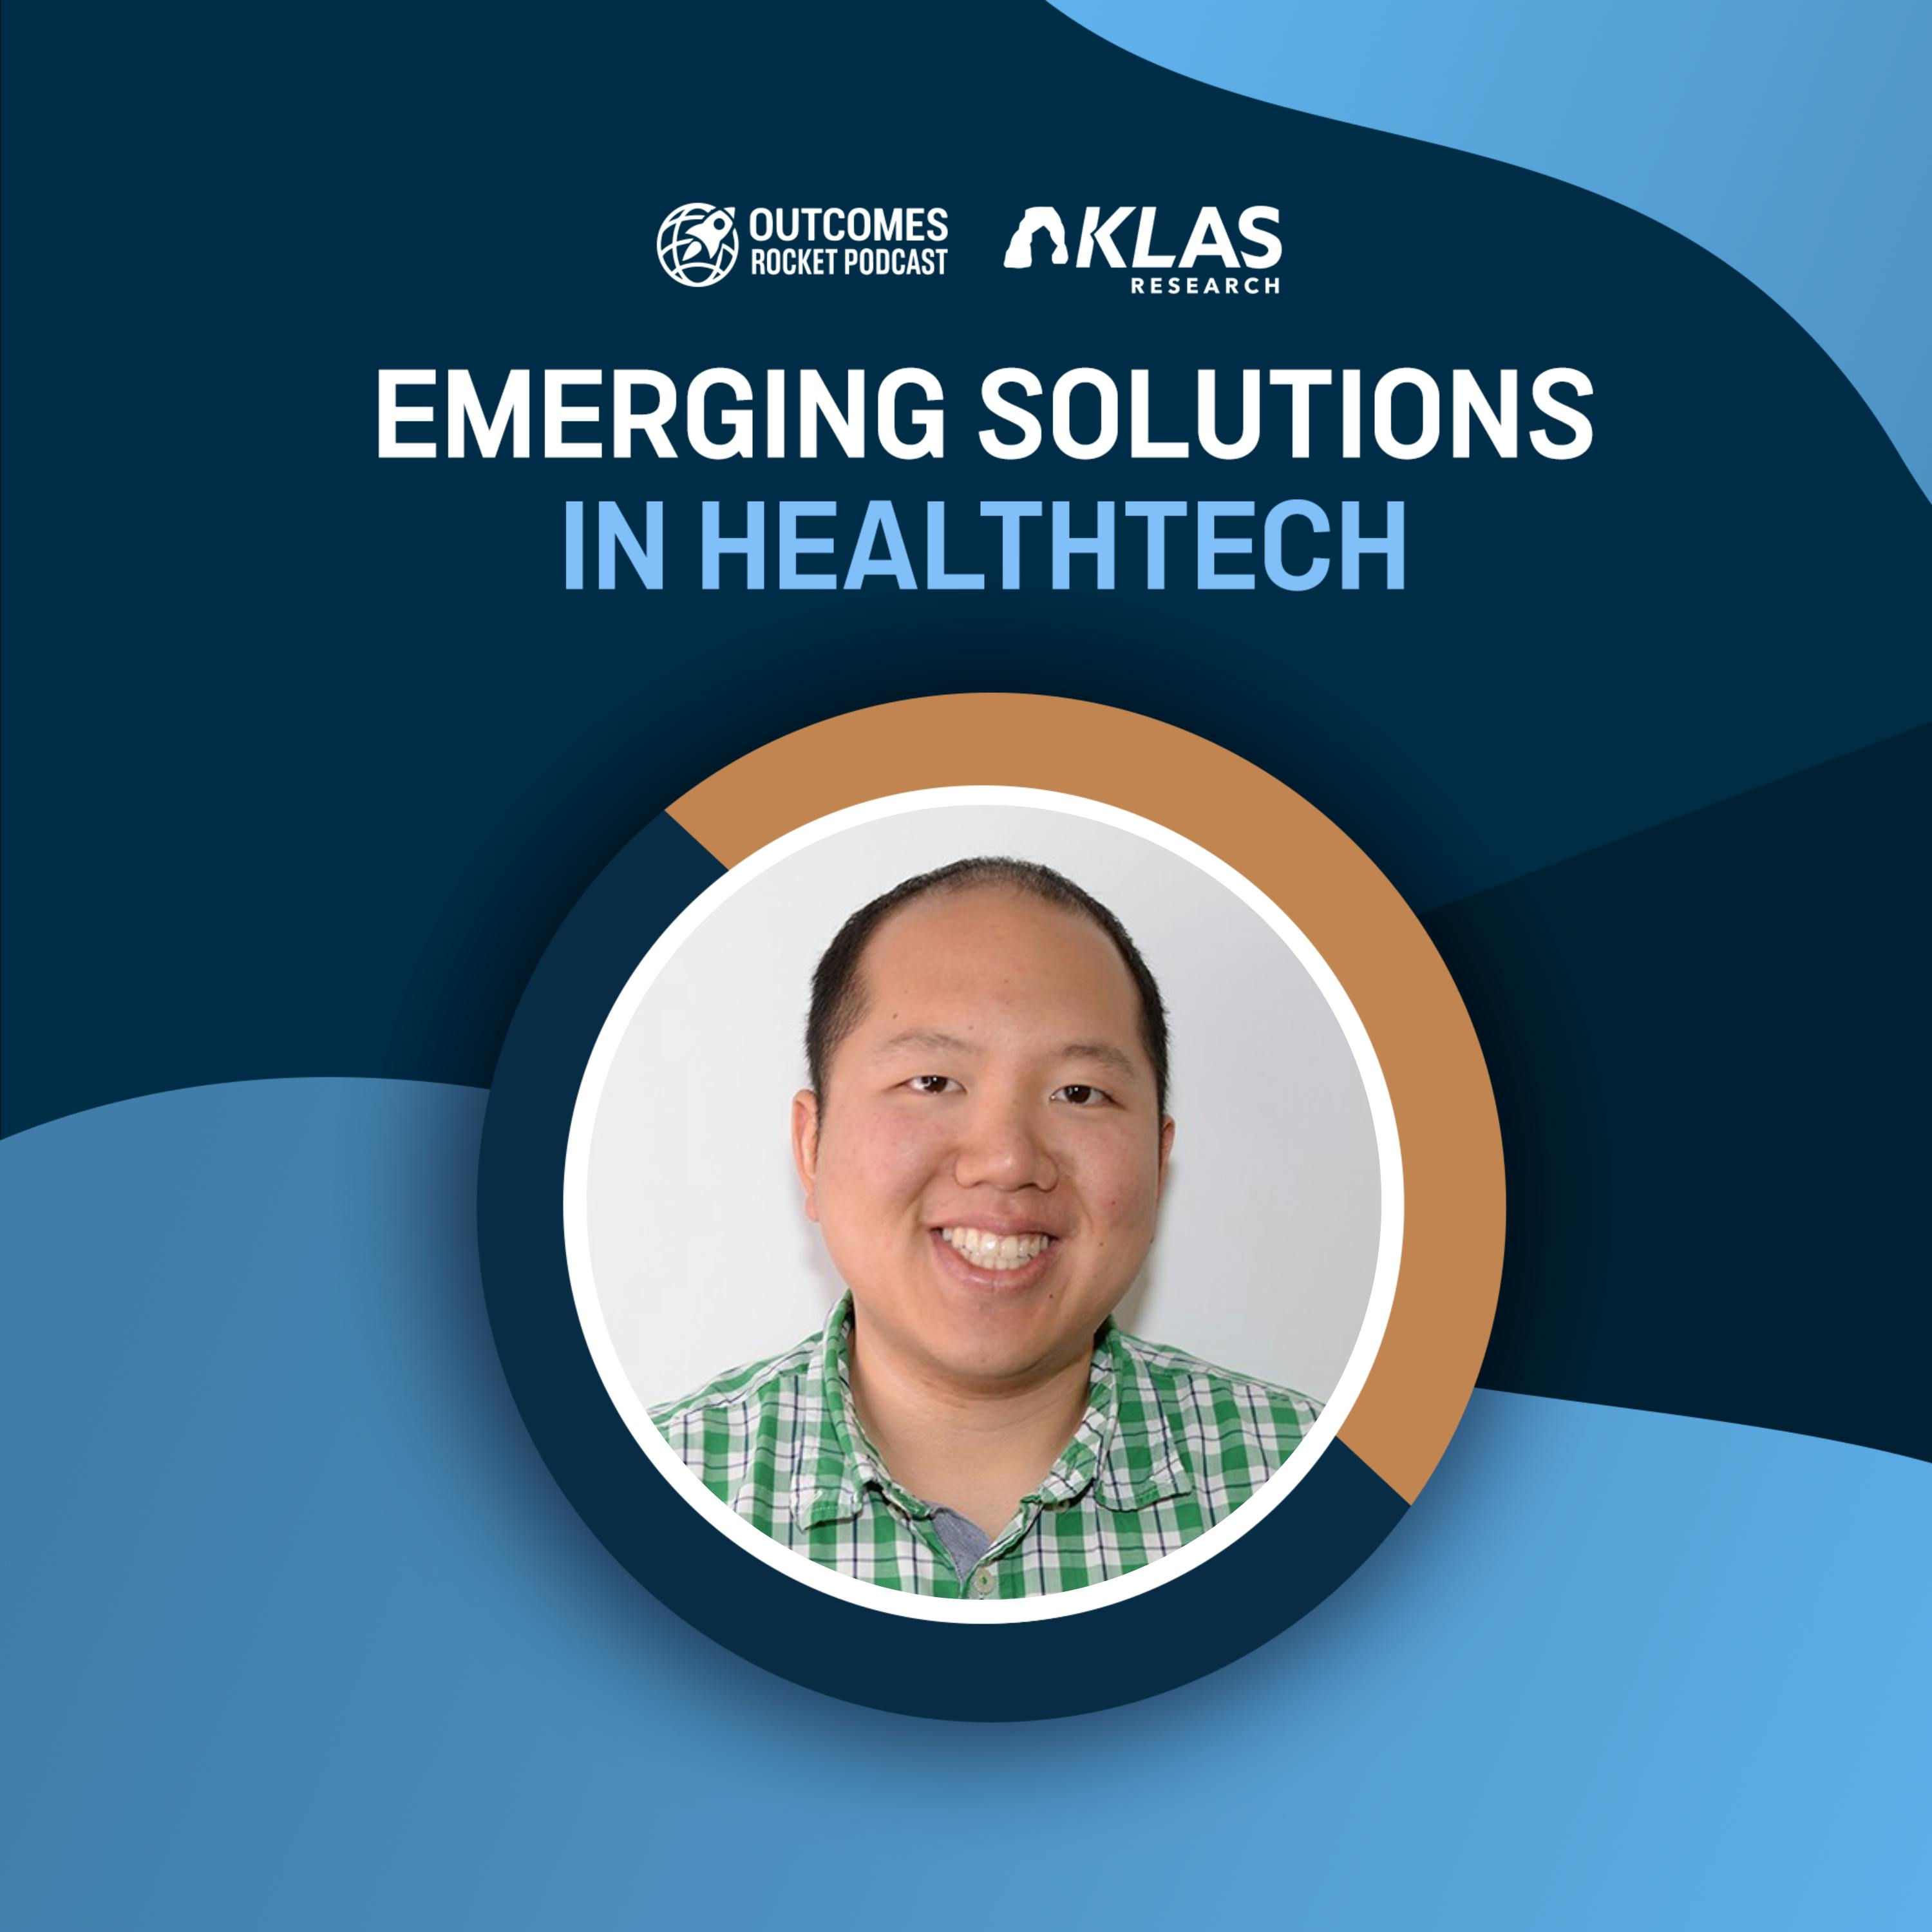 The Power of Connection: SeamlessMD’s Multi-Platform Approach to Transforming Healthcare with Joshua Liu, CEO of SeamlessMD